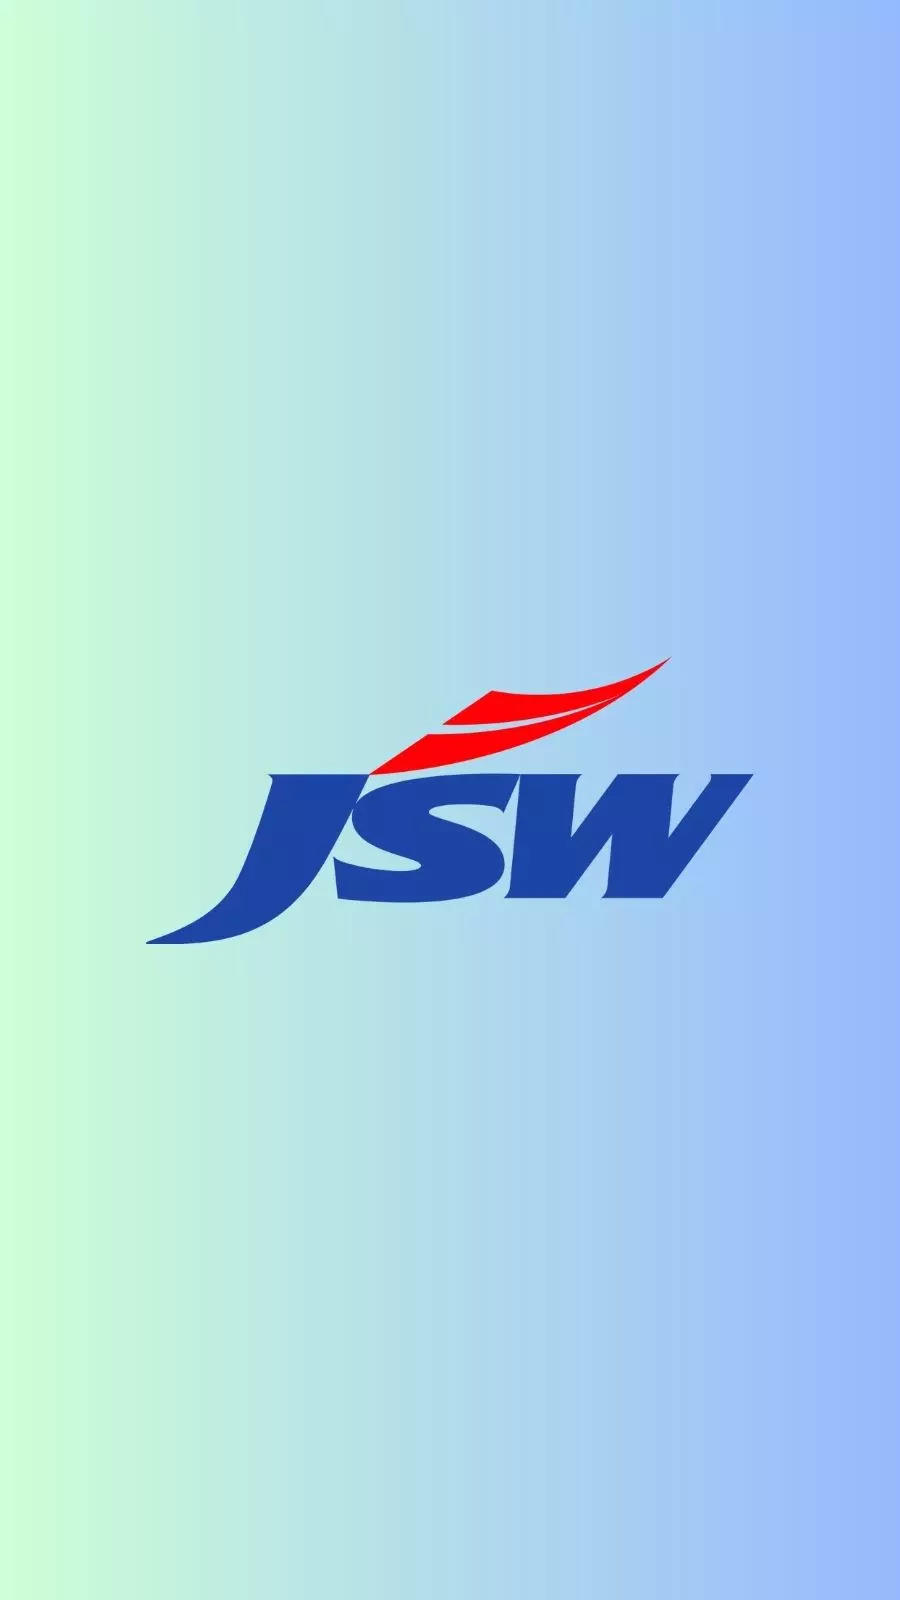 Sangli info - BUSINESS NAME: #KWALITIY #PAINTS (authorised #Dealer of #JSW  #paints) CATEGORY: #Construction And #Broker SERVICES: 24hrs service, All  types of JSW paints, All #painting #Materials CITY: Miraj ADDRESS: Shri  Enclave,